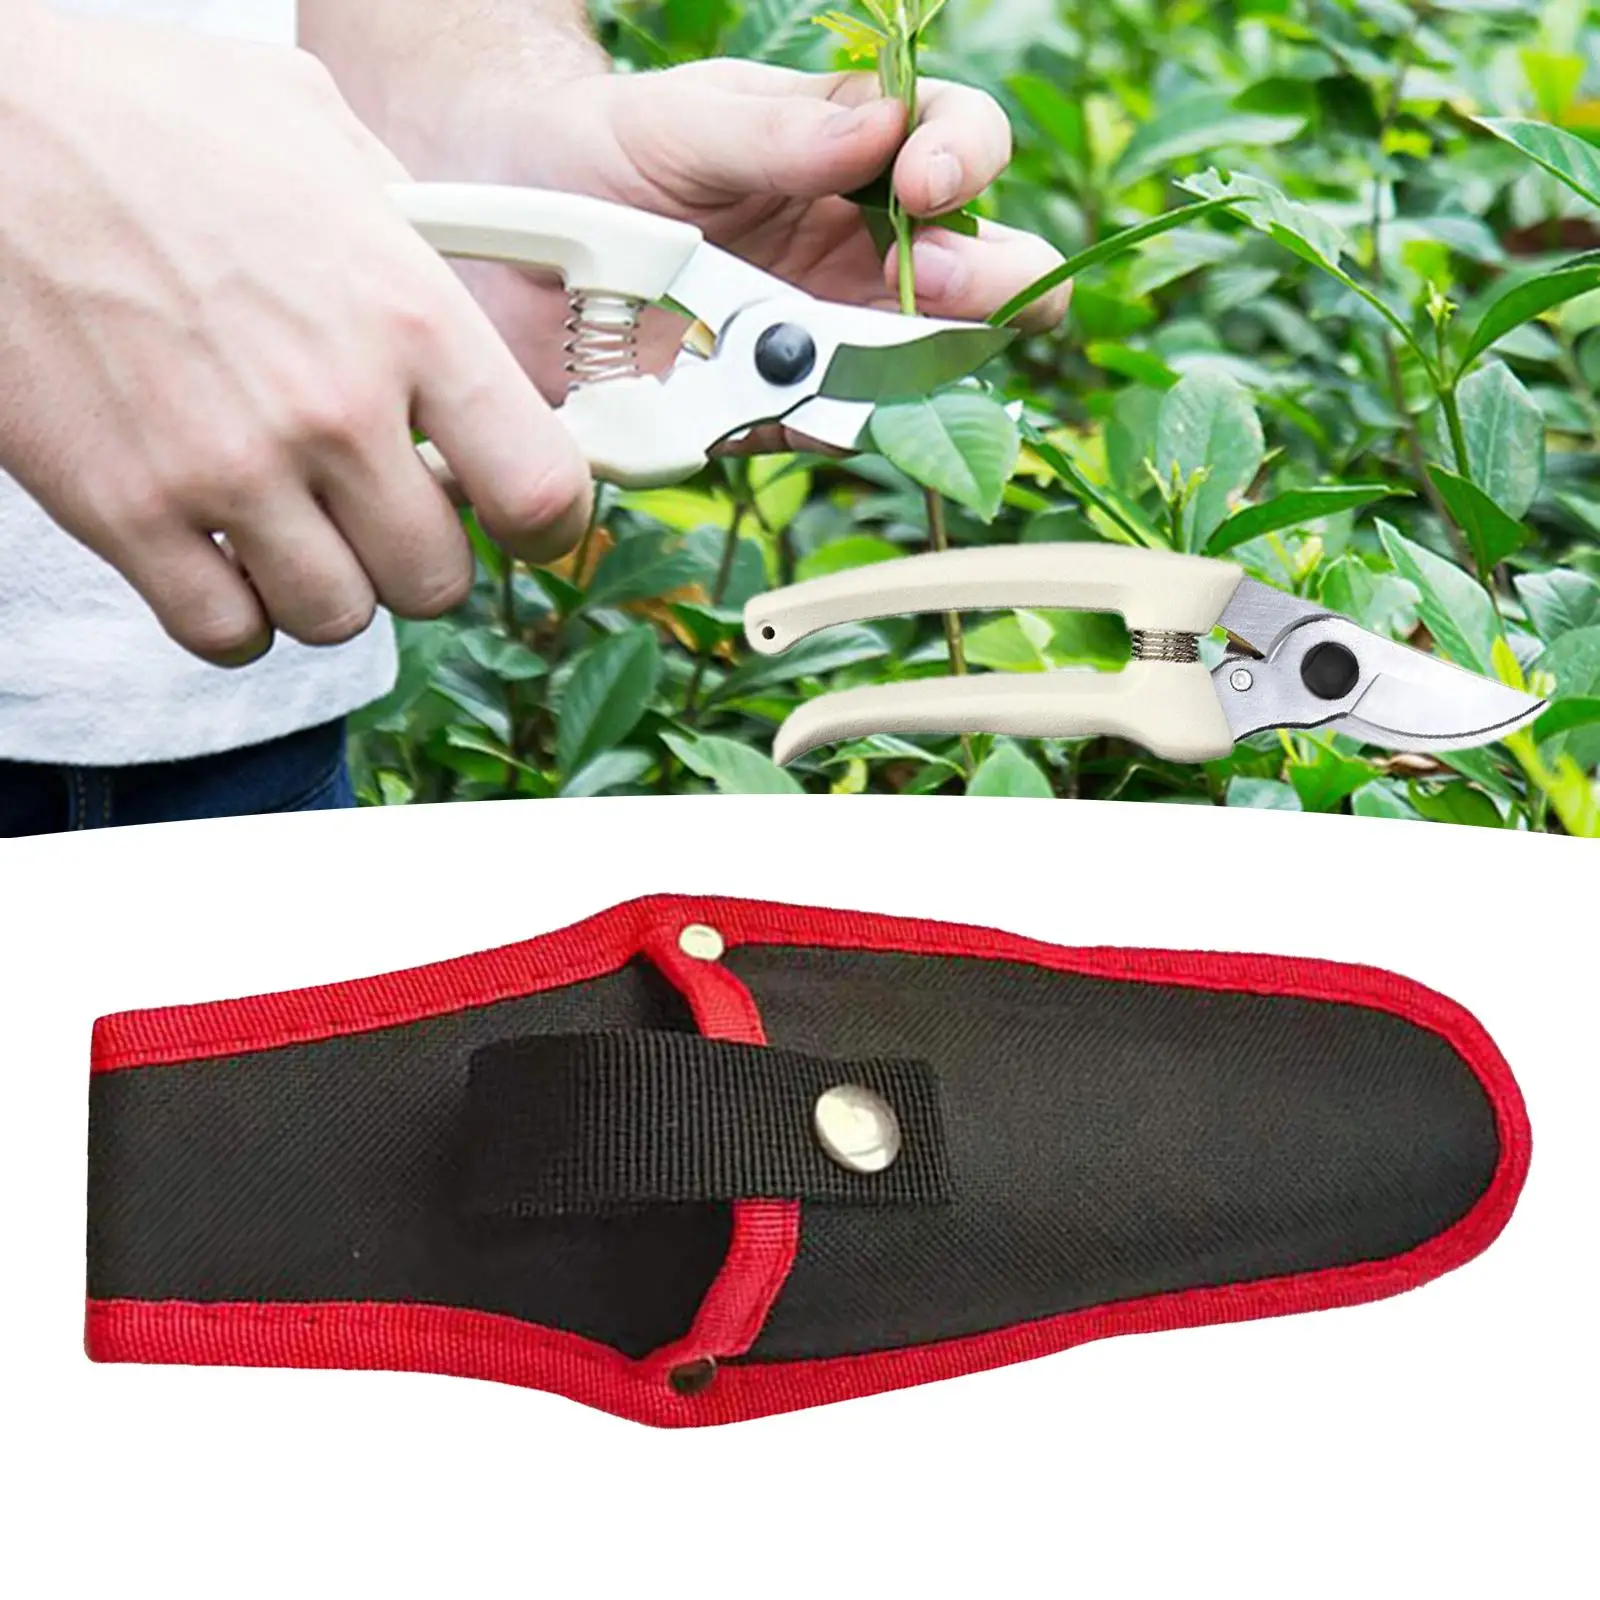 Pruner Sheath Tool Belt Accessory Pouch Pruning Shear Holster for Pliers Shears Scissors Electrician Plant Shear Trimming Tools